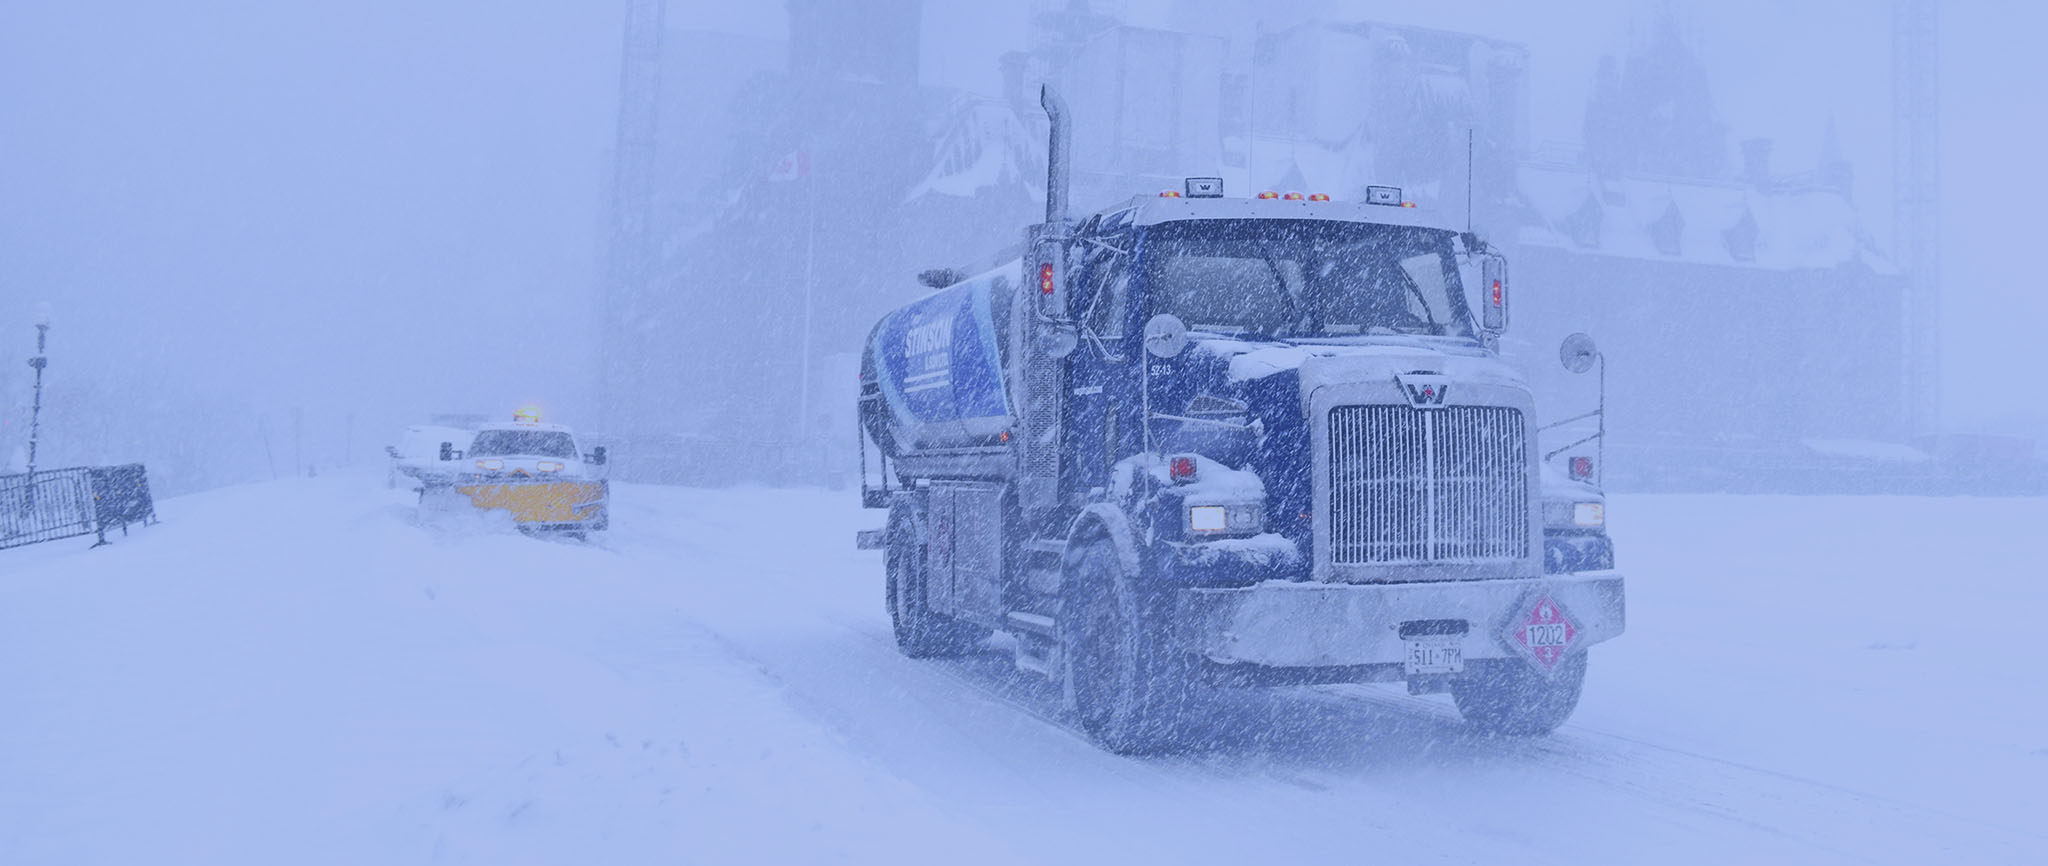 A truck utilizing custom GPS tracking solutions for trucking fleets from On Demand Tracking drives through a snowstorm in a remote location